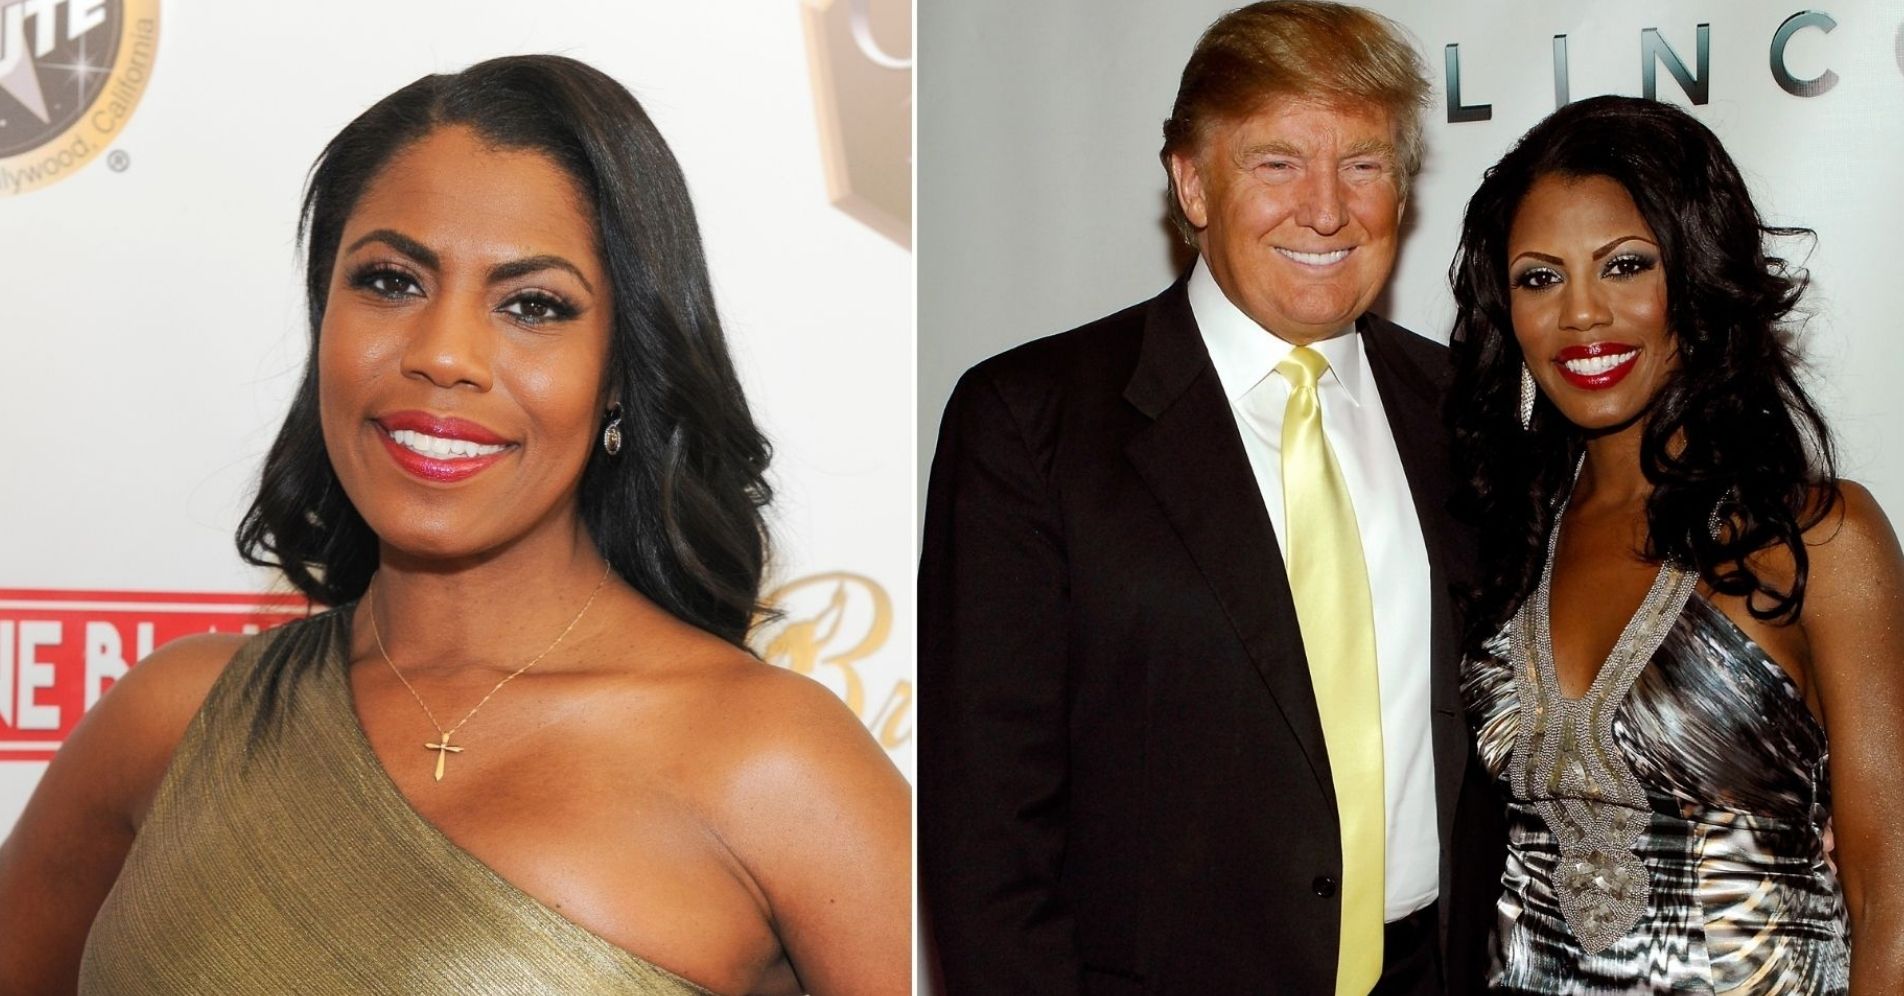 A reality TV villain and Trump’s former confidante: Omarosa Manigault Newman is Big Brother VIP’s most controversial contestant